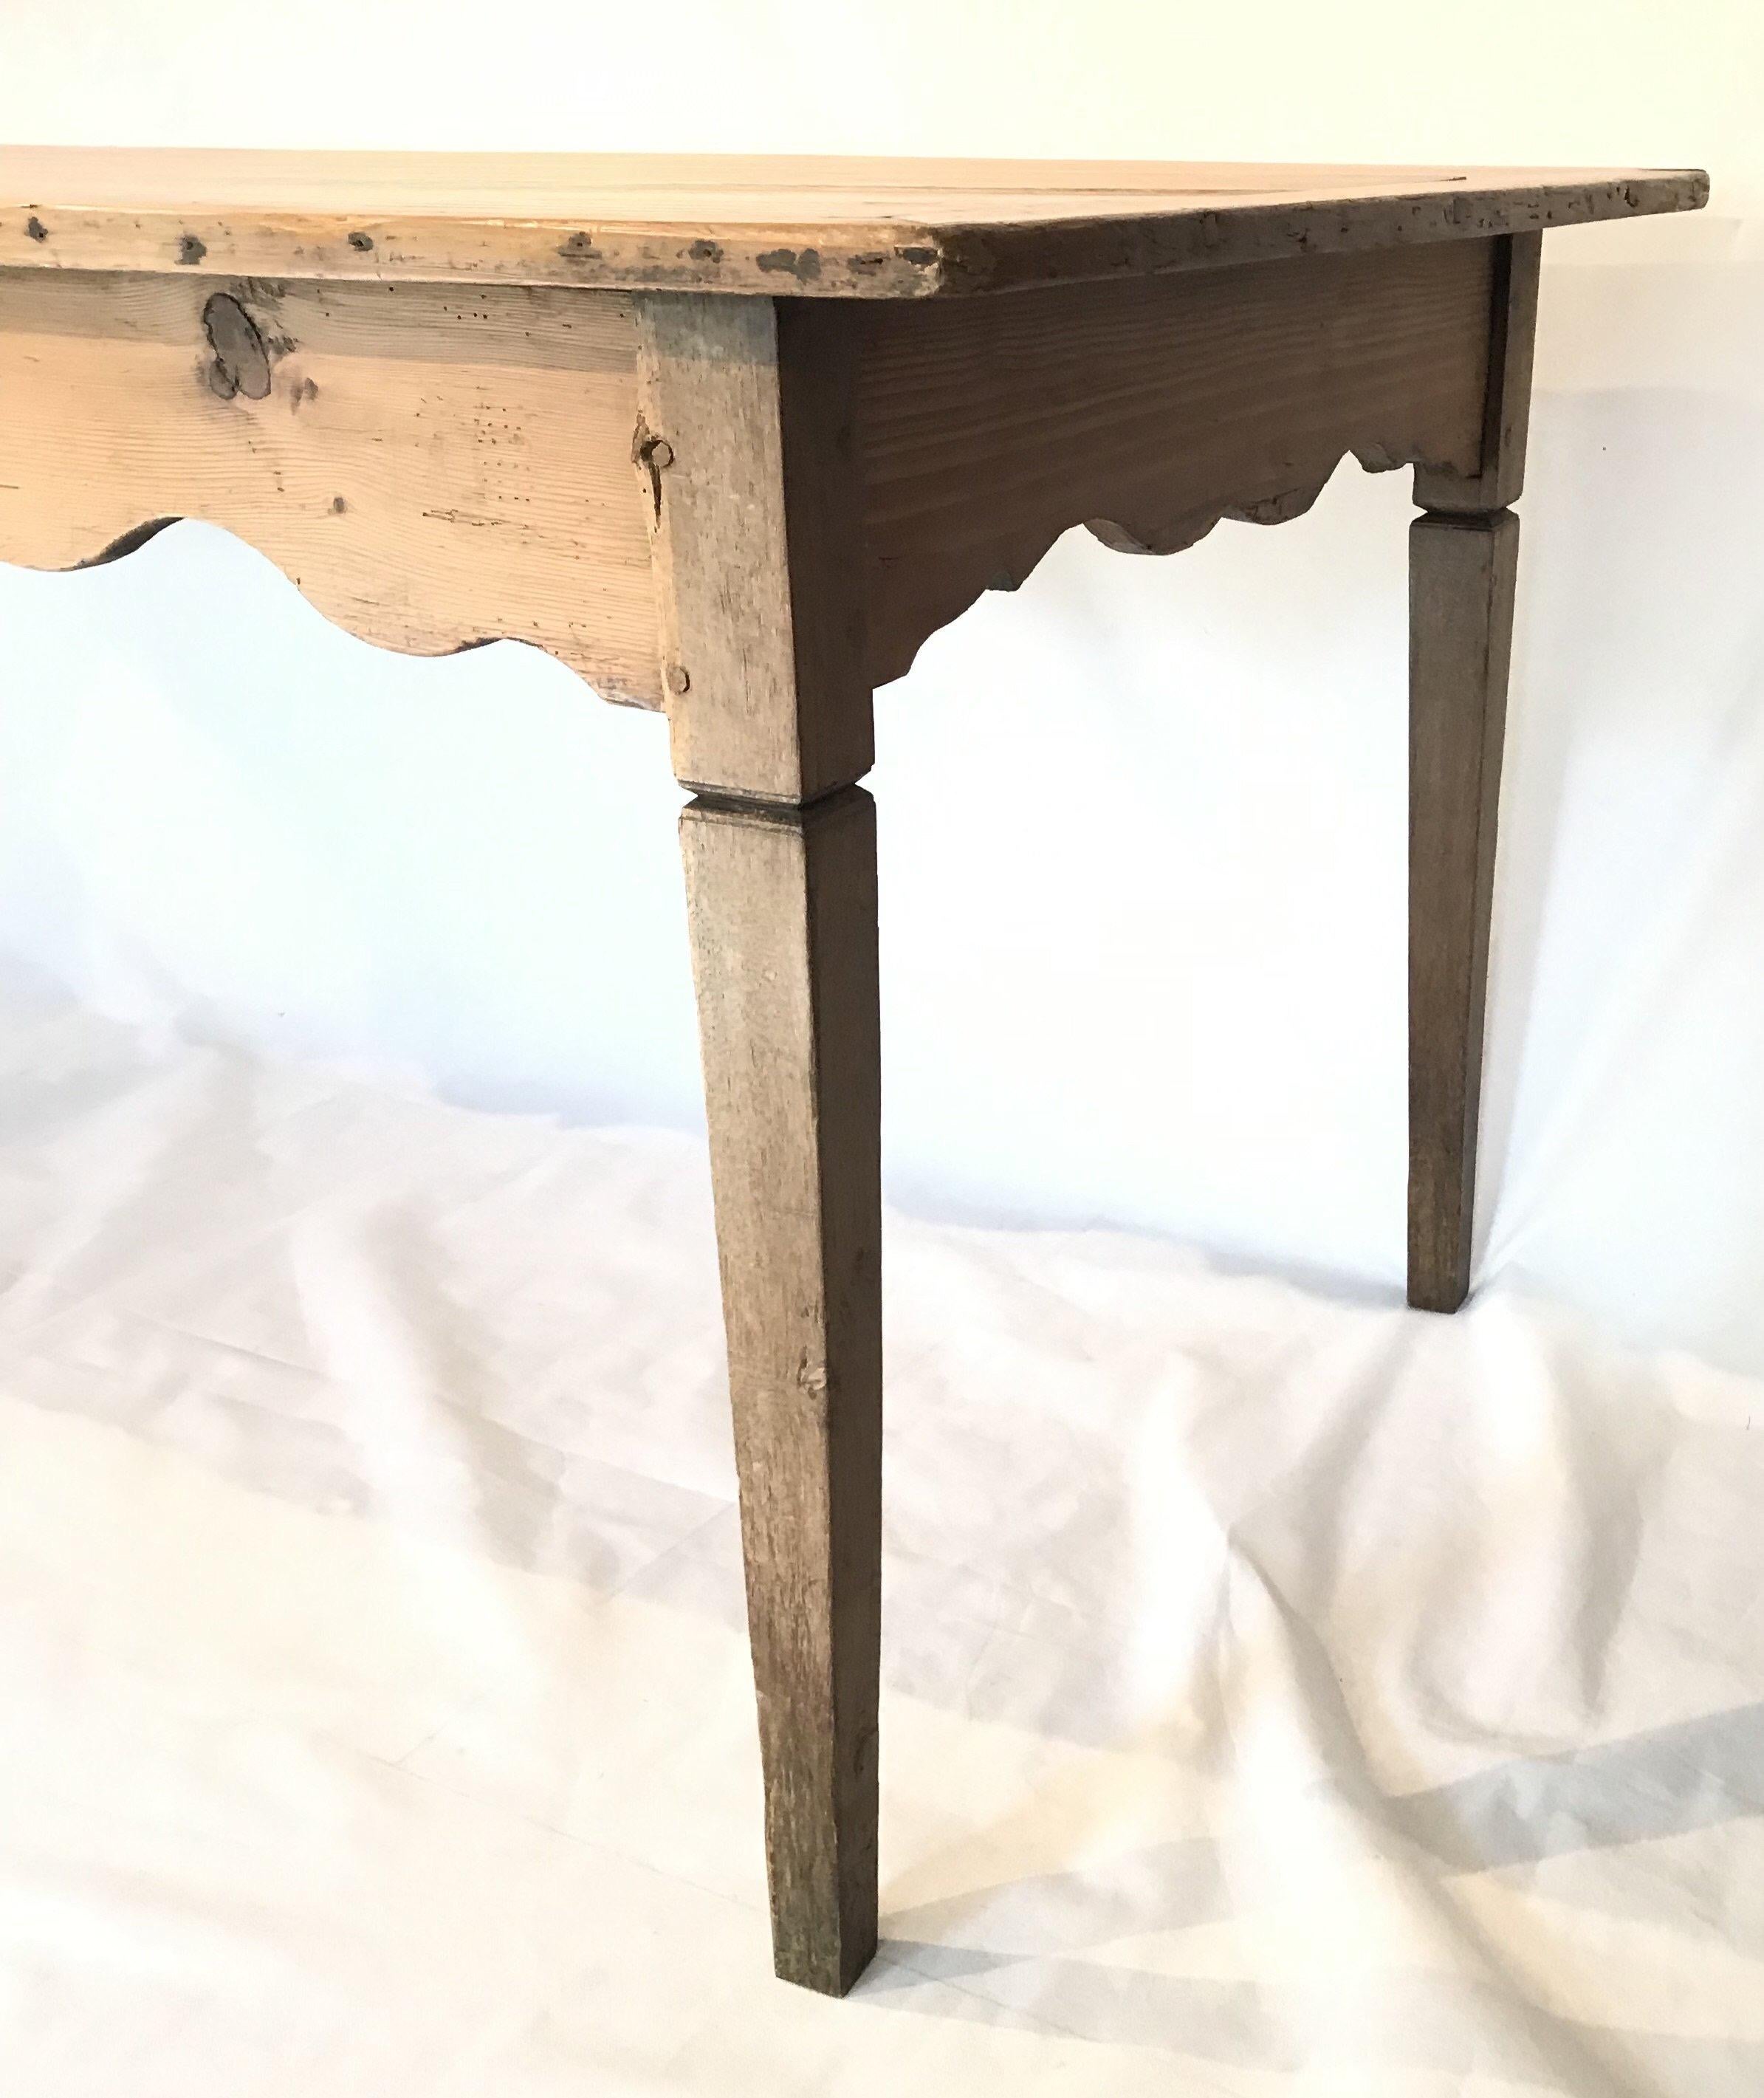 Very charming solid pine farmhouse table in very good condition with plenty of character dating from the 1860s and will seat 8 people in comfort. It stands on robust tapered legs. Gorgeous pine tabletop with wonderful aged patina.
Measures: Apron